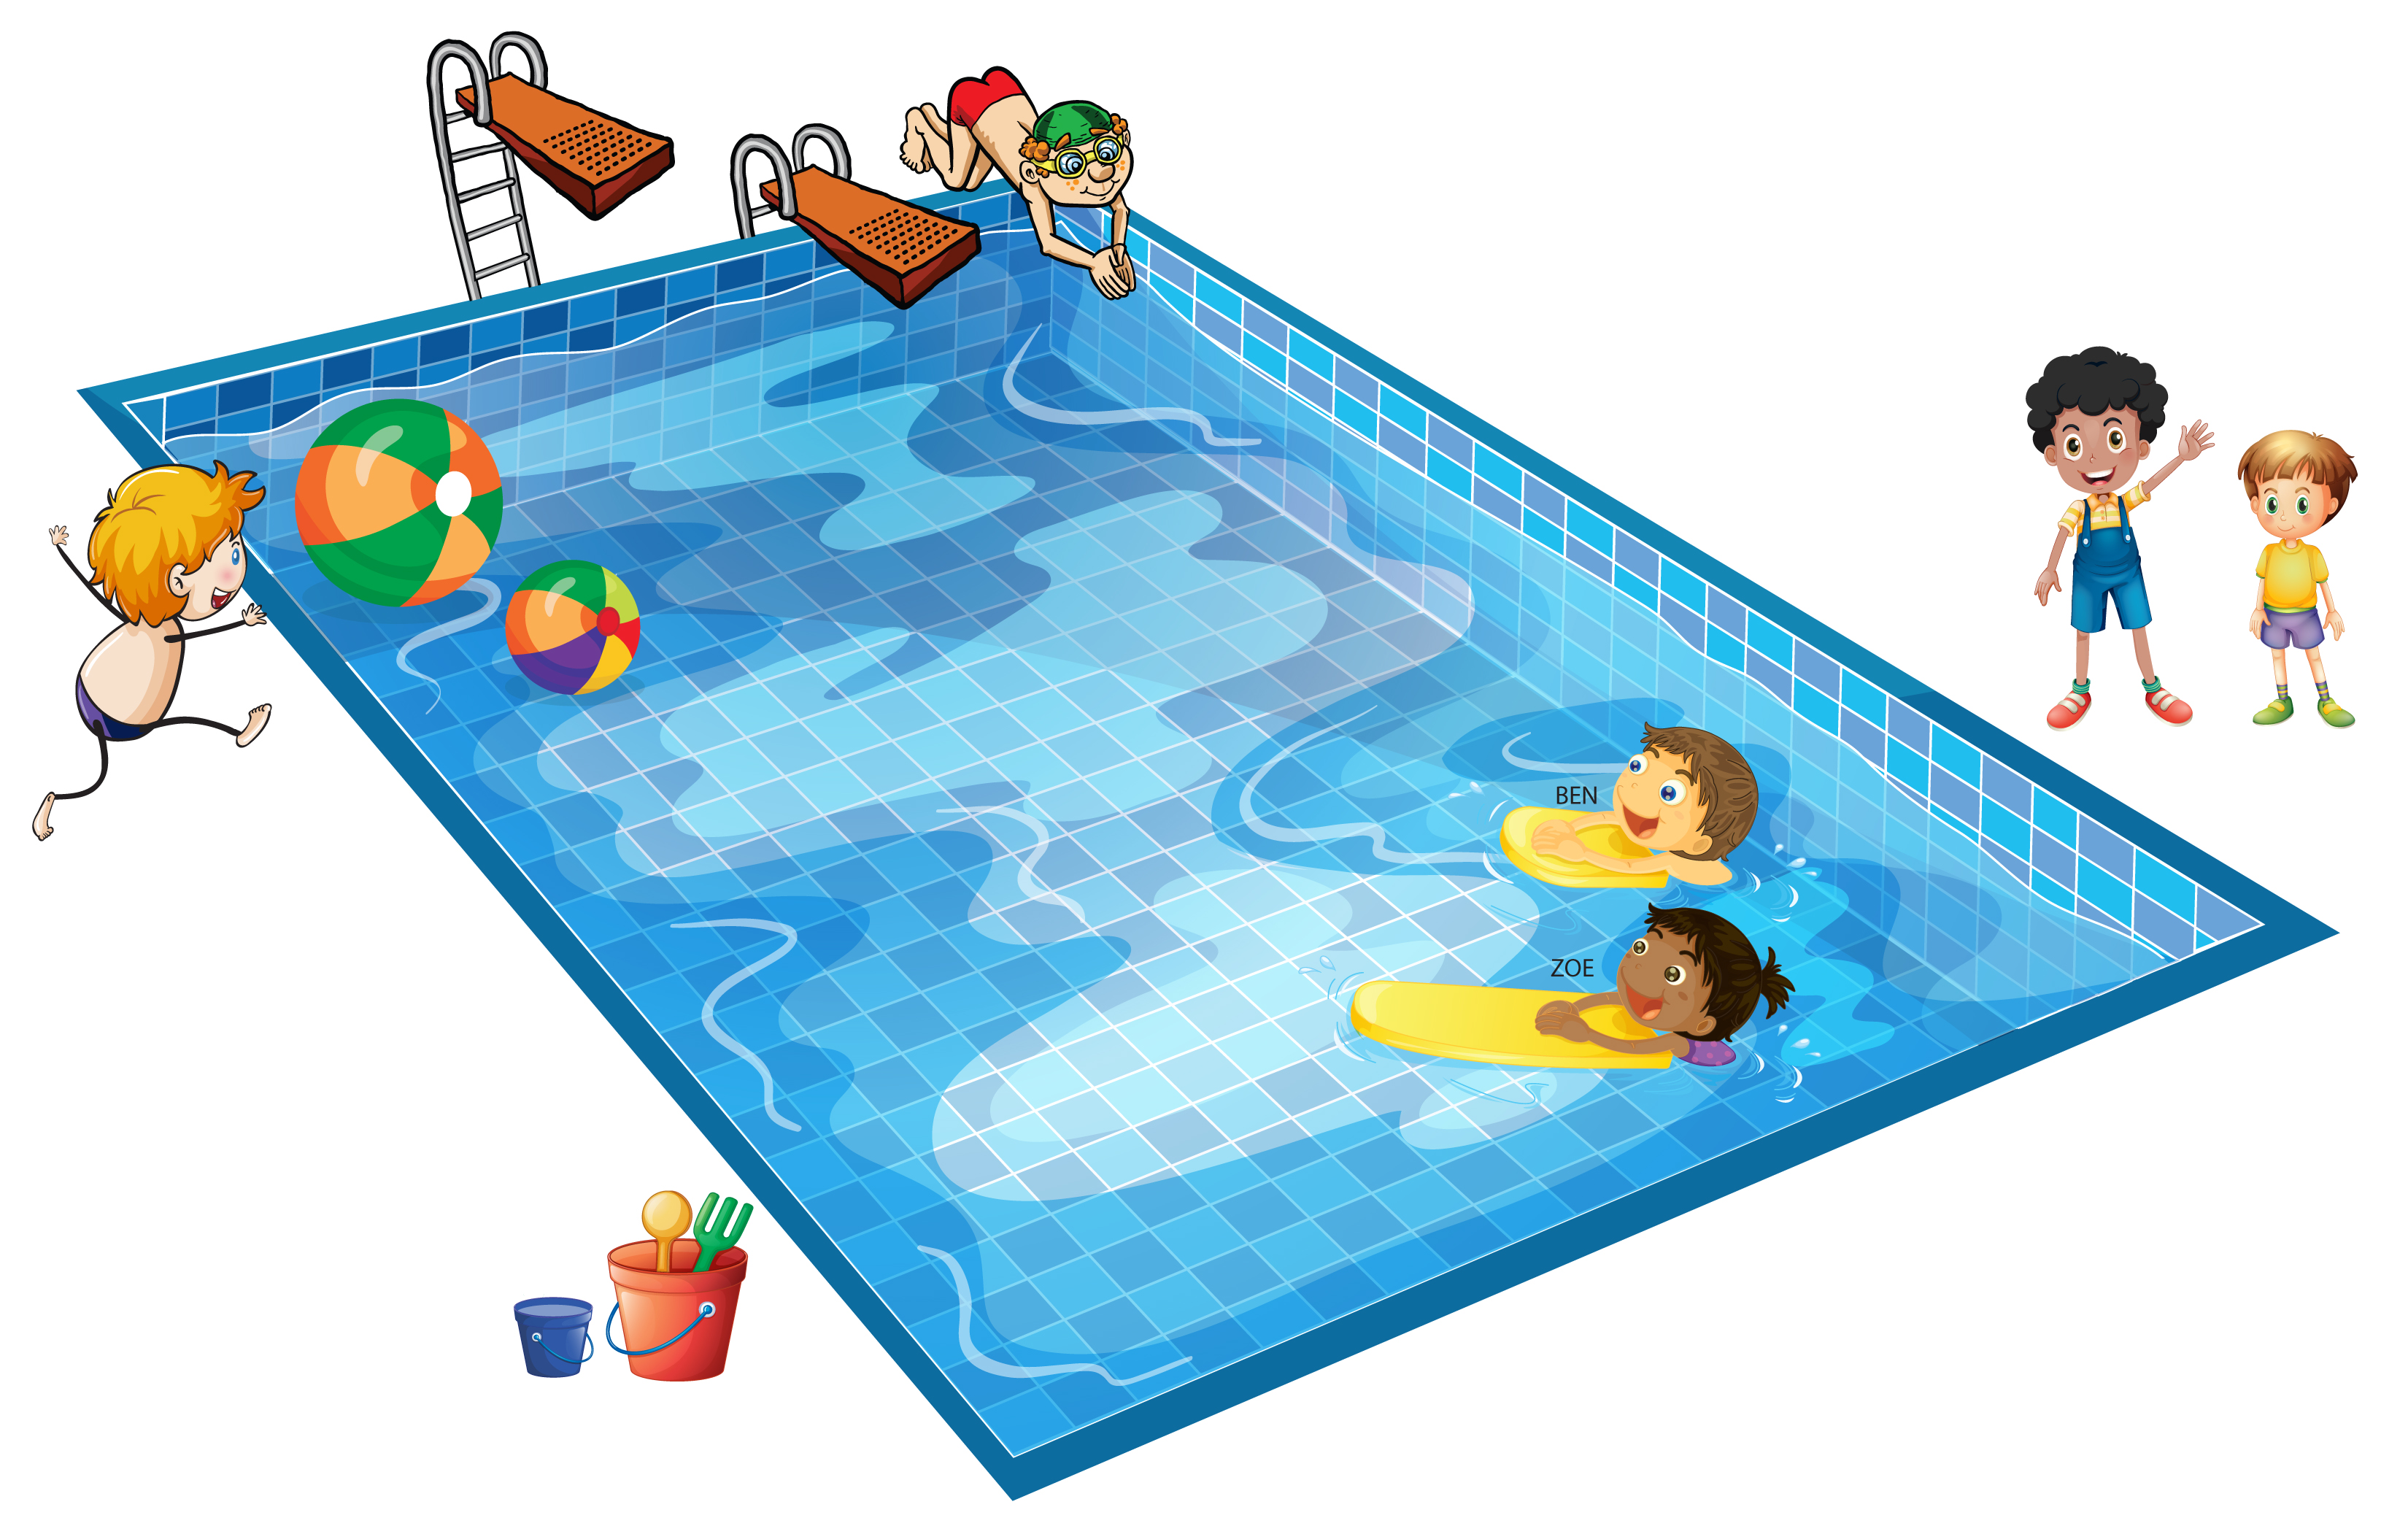 Pool clip art images free clipart images